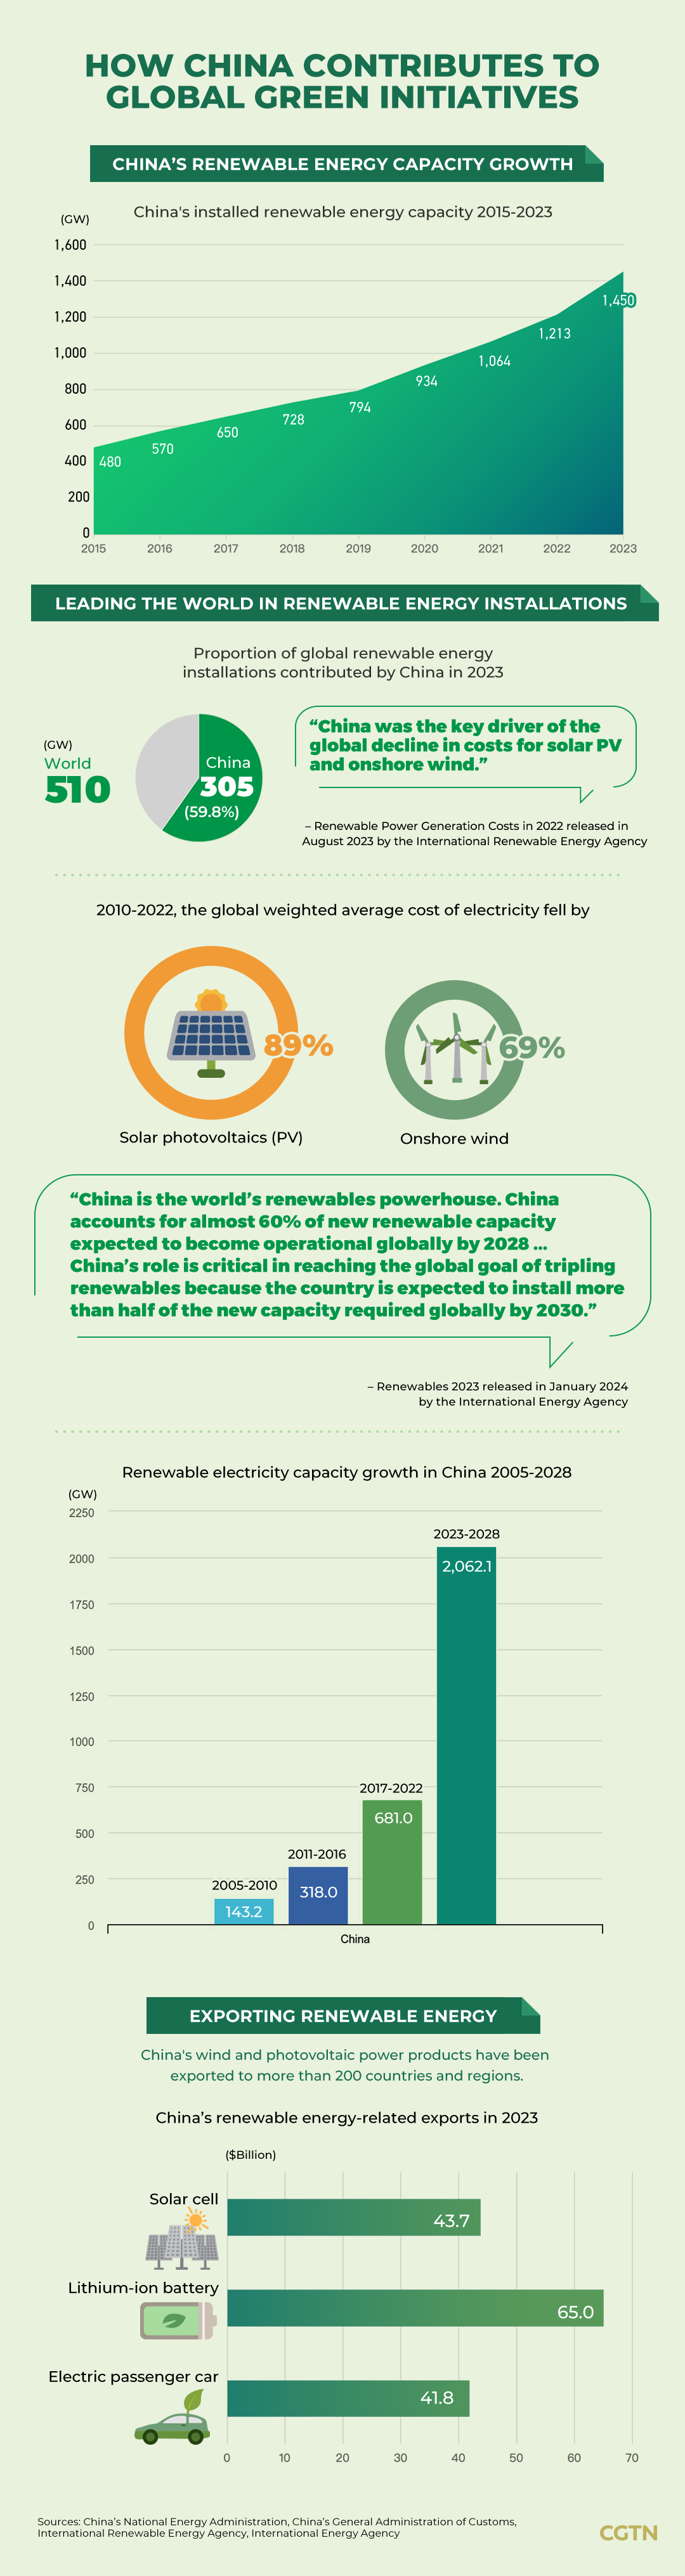 Graphic: How China contributes to global green initiatives